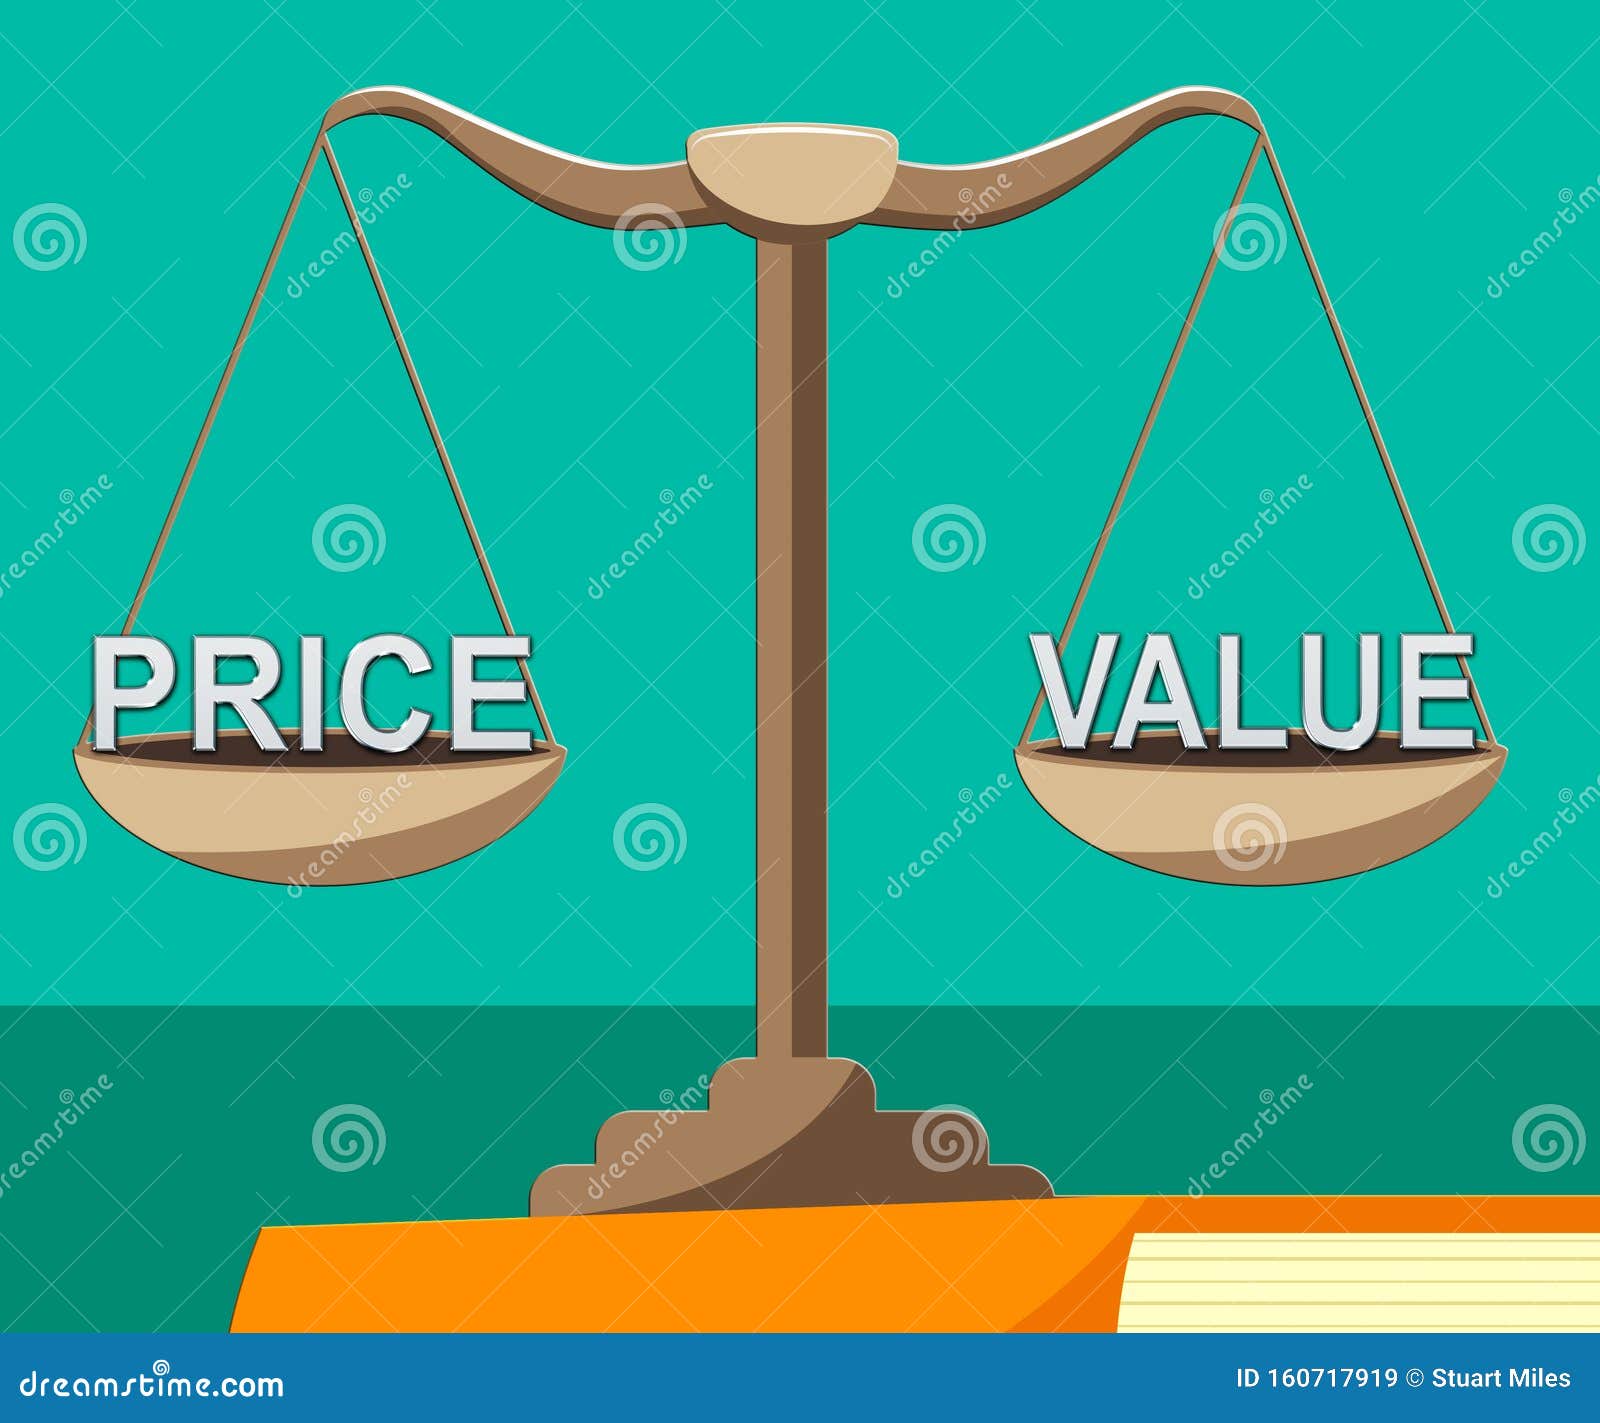 price vs value balance comparing cost outlay against financial worth - 3d 